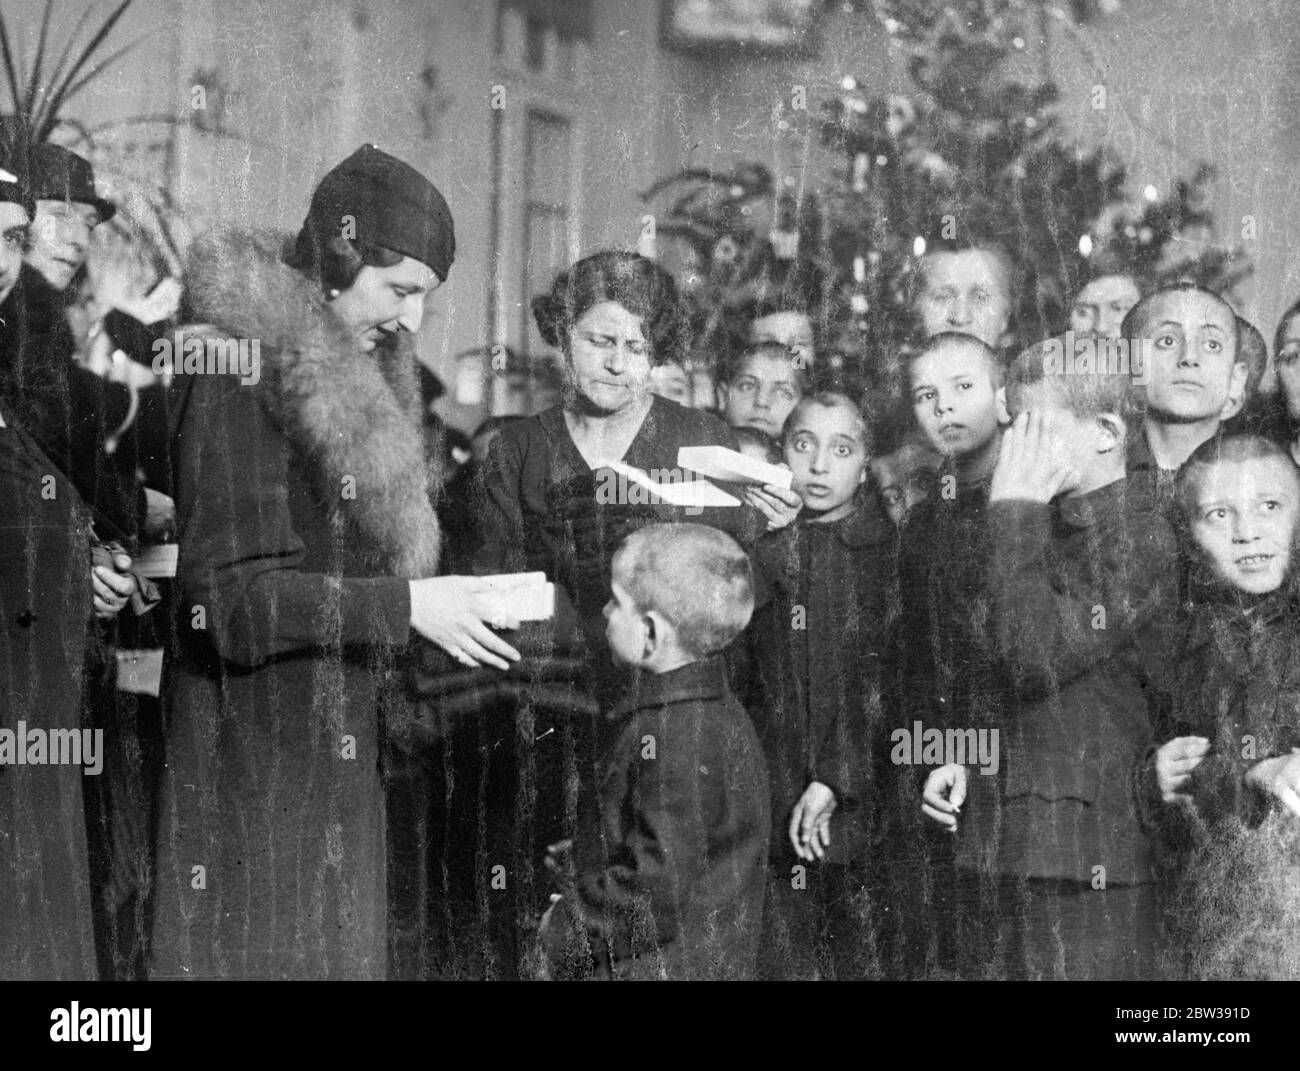 Queen of Bulgaria presents gifts to children . The Queen of Bulgaria paid a visit to an infants hostel and creche in Sofia and distributed gifts to the children . Photo shows ; Queen of Bulgaria distributing gifts to the children during her visit . 15 January 1934 30s, 30's, 1930s, 1930's, thirties, nineteen thirties Stock Photo